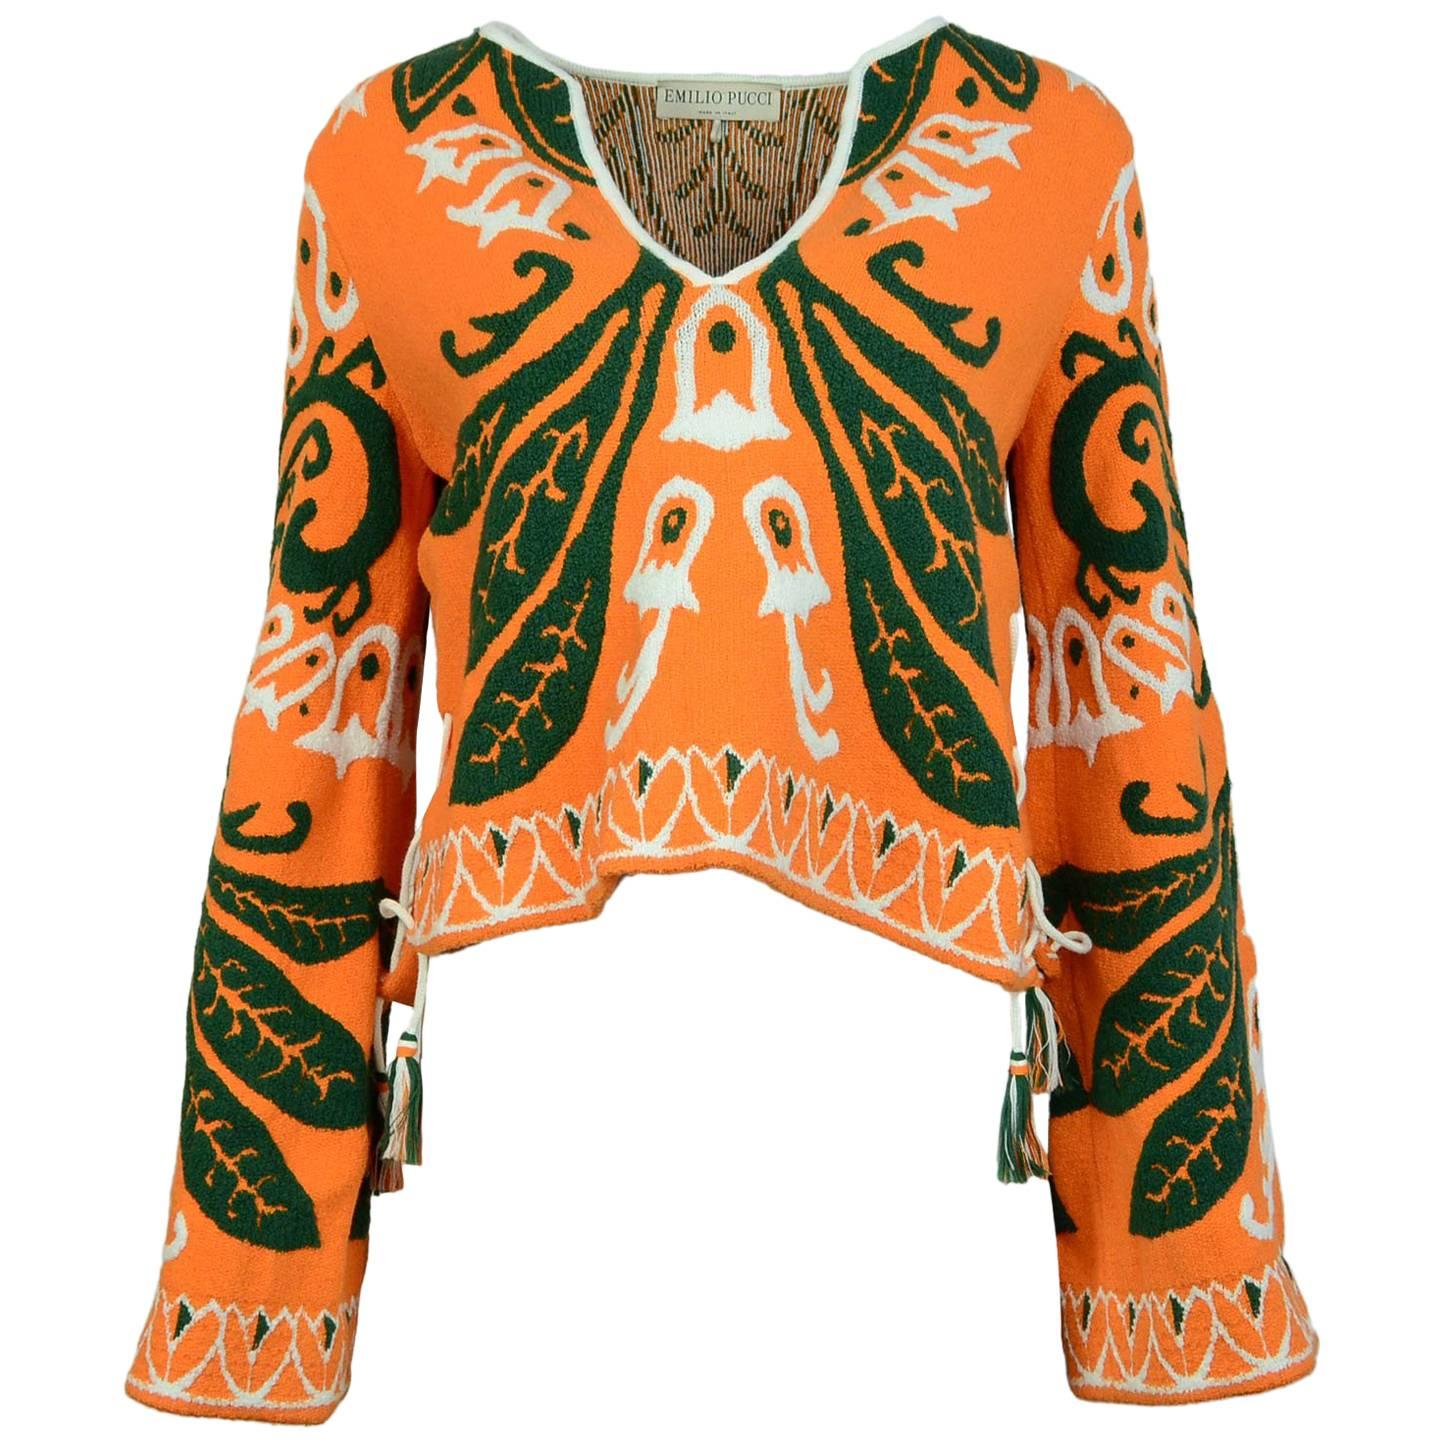 Emilio Pucci Orange Bell Sleeve Top Sz S with Box